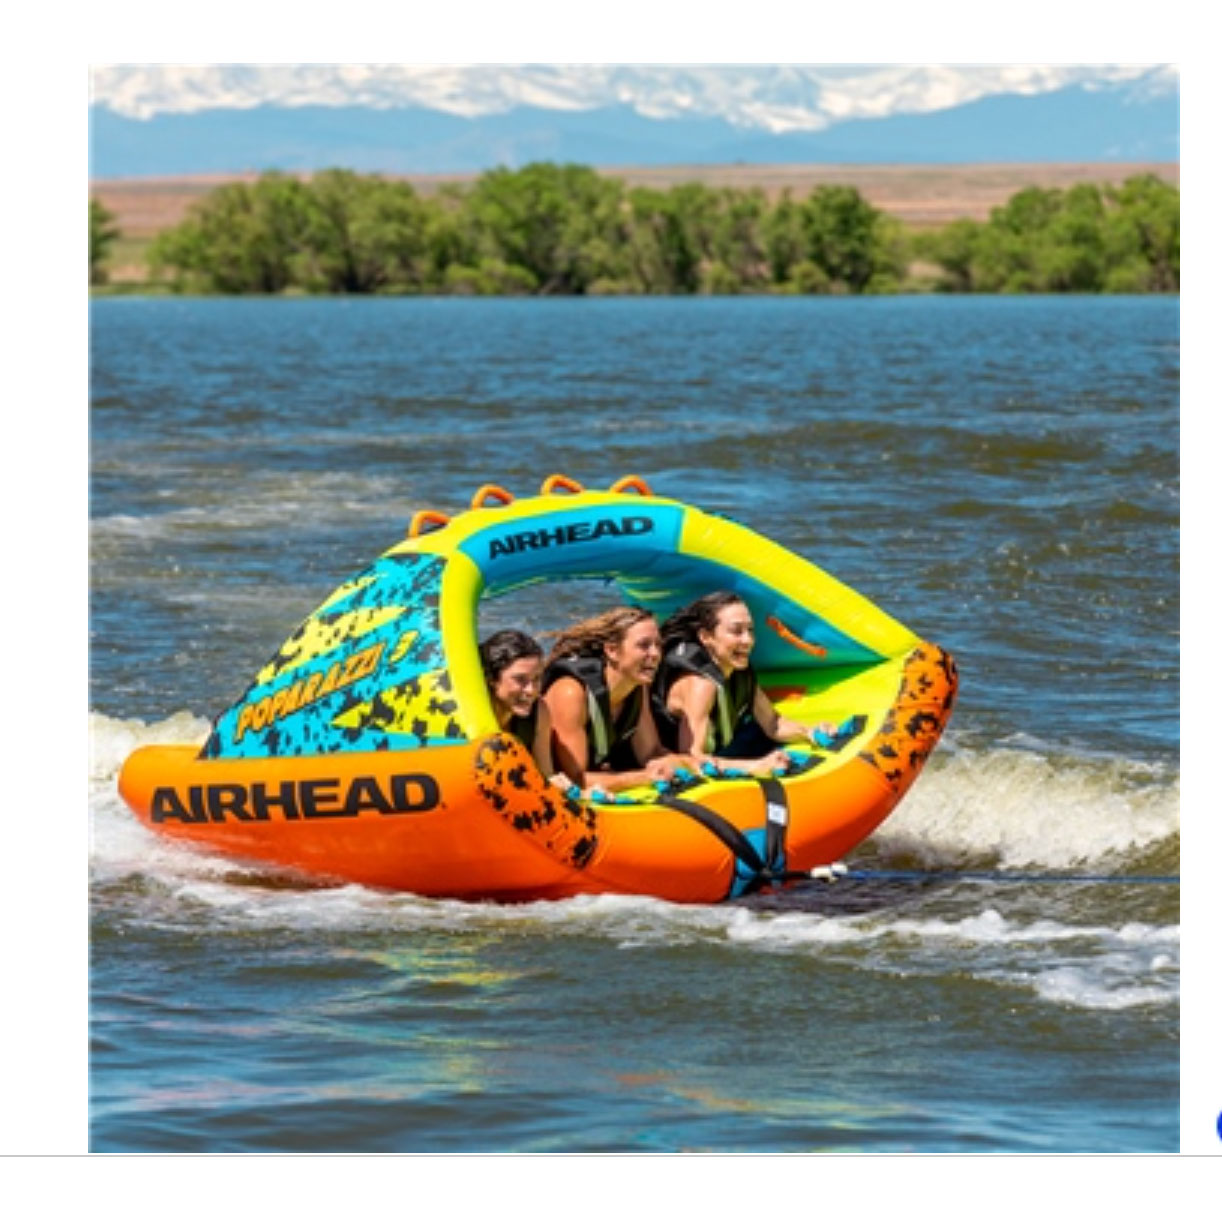 Airhead AHPZ-1750 Poparazzi 3 Person Inflatable Towable Water Lake Boating Tube - image 3 of 7